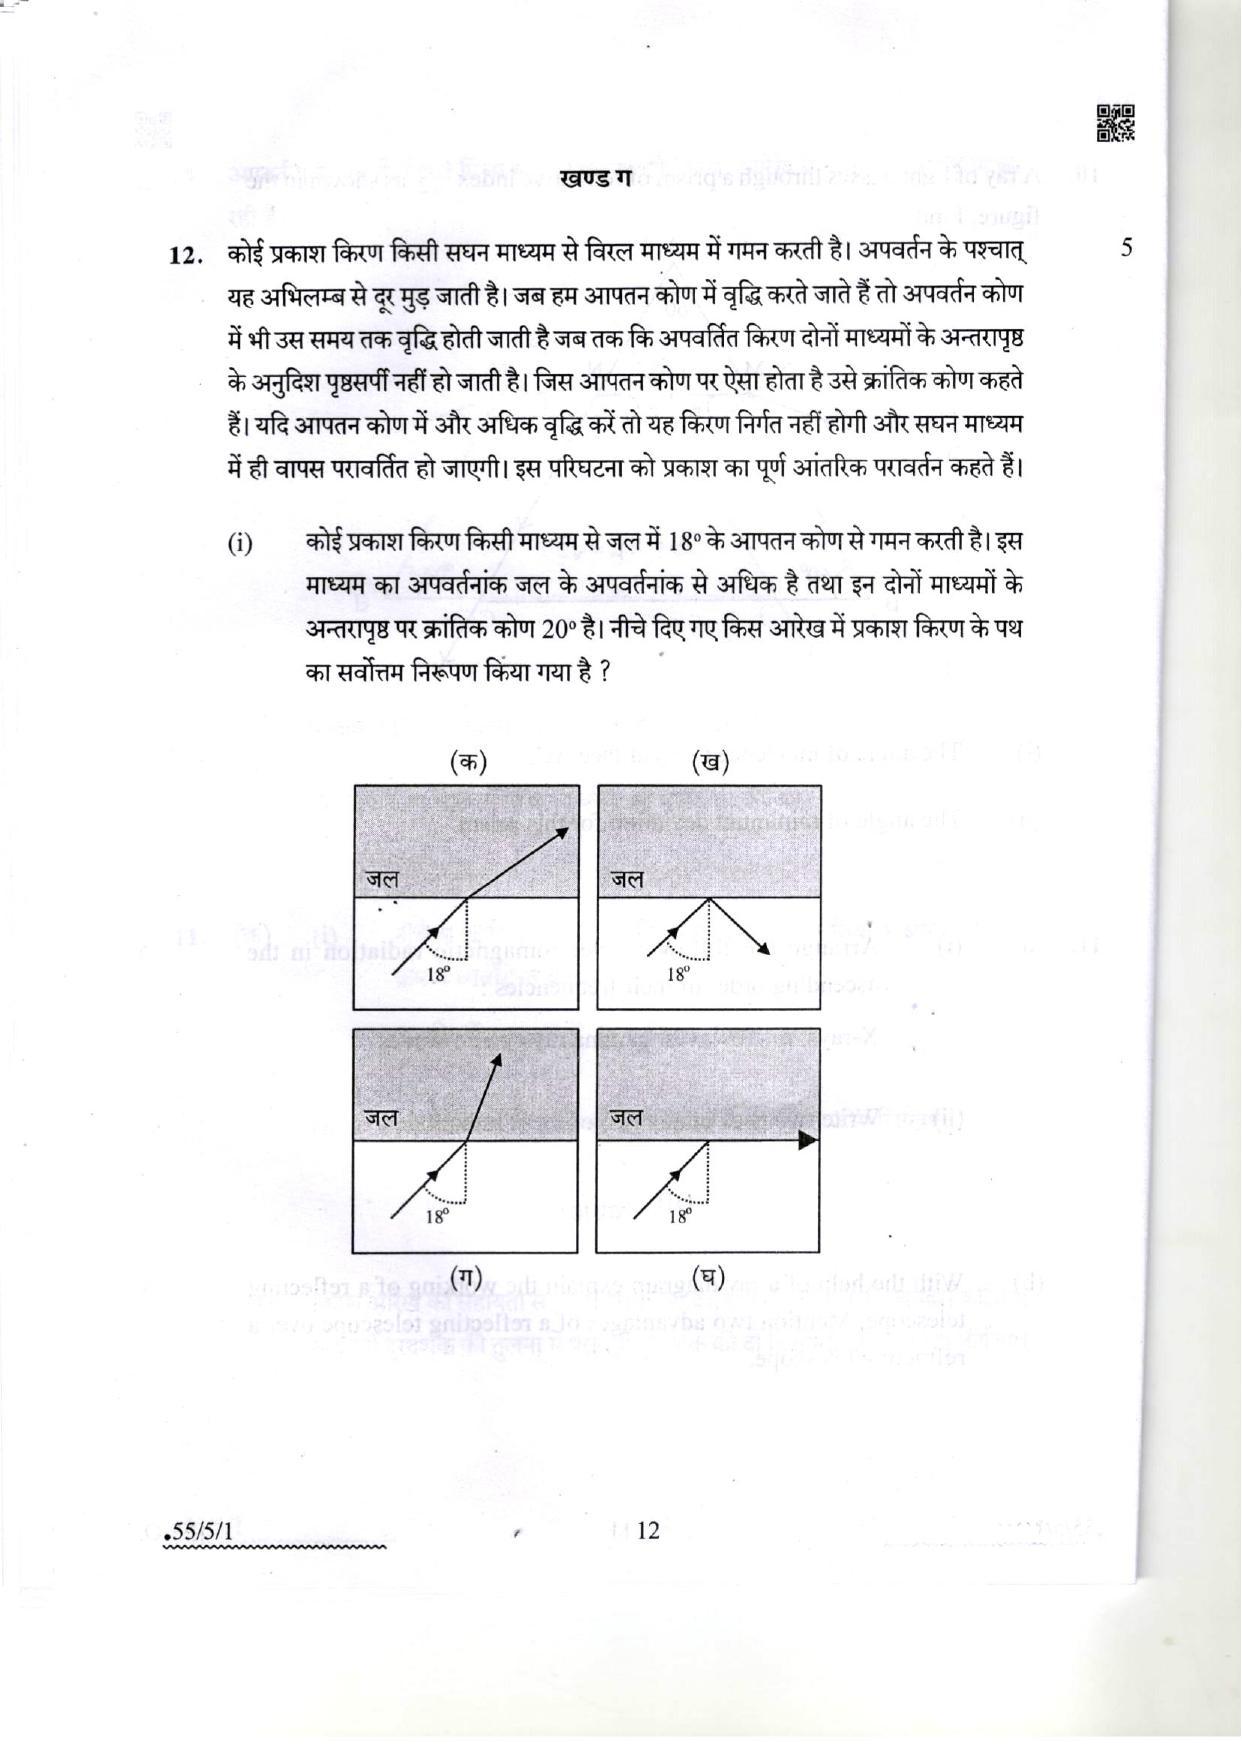 CBSE Class 12 55-5-1 Physics 2022 Question Paper - Page 12